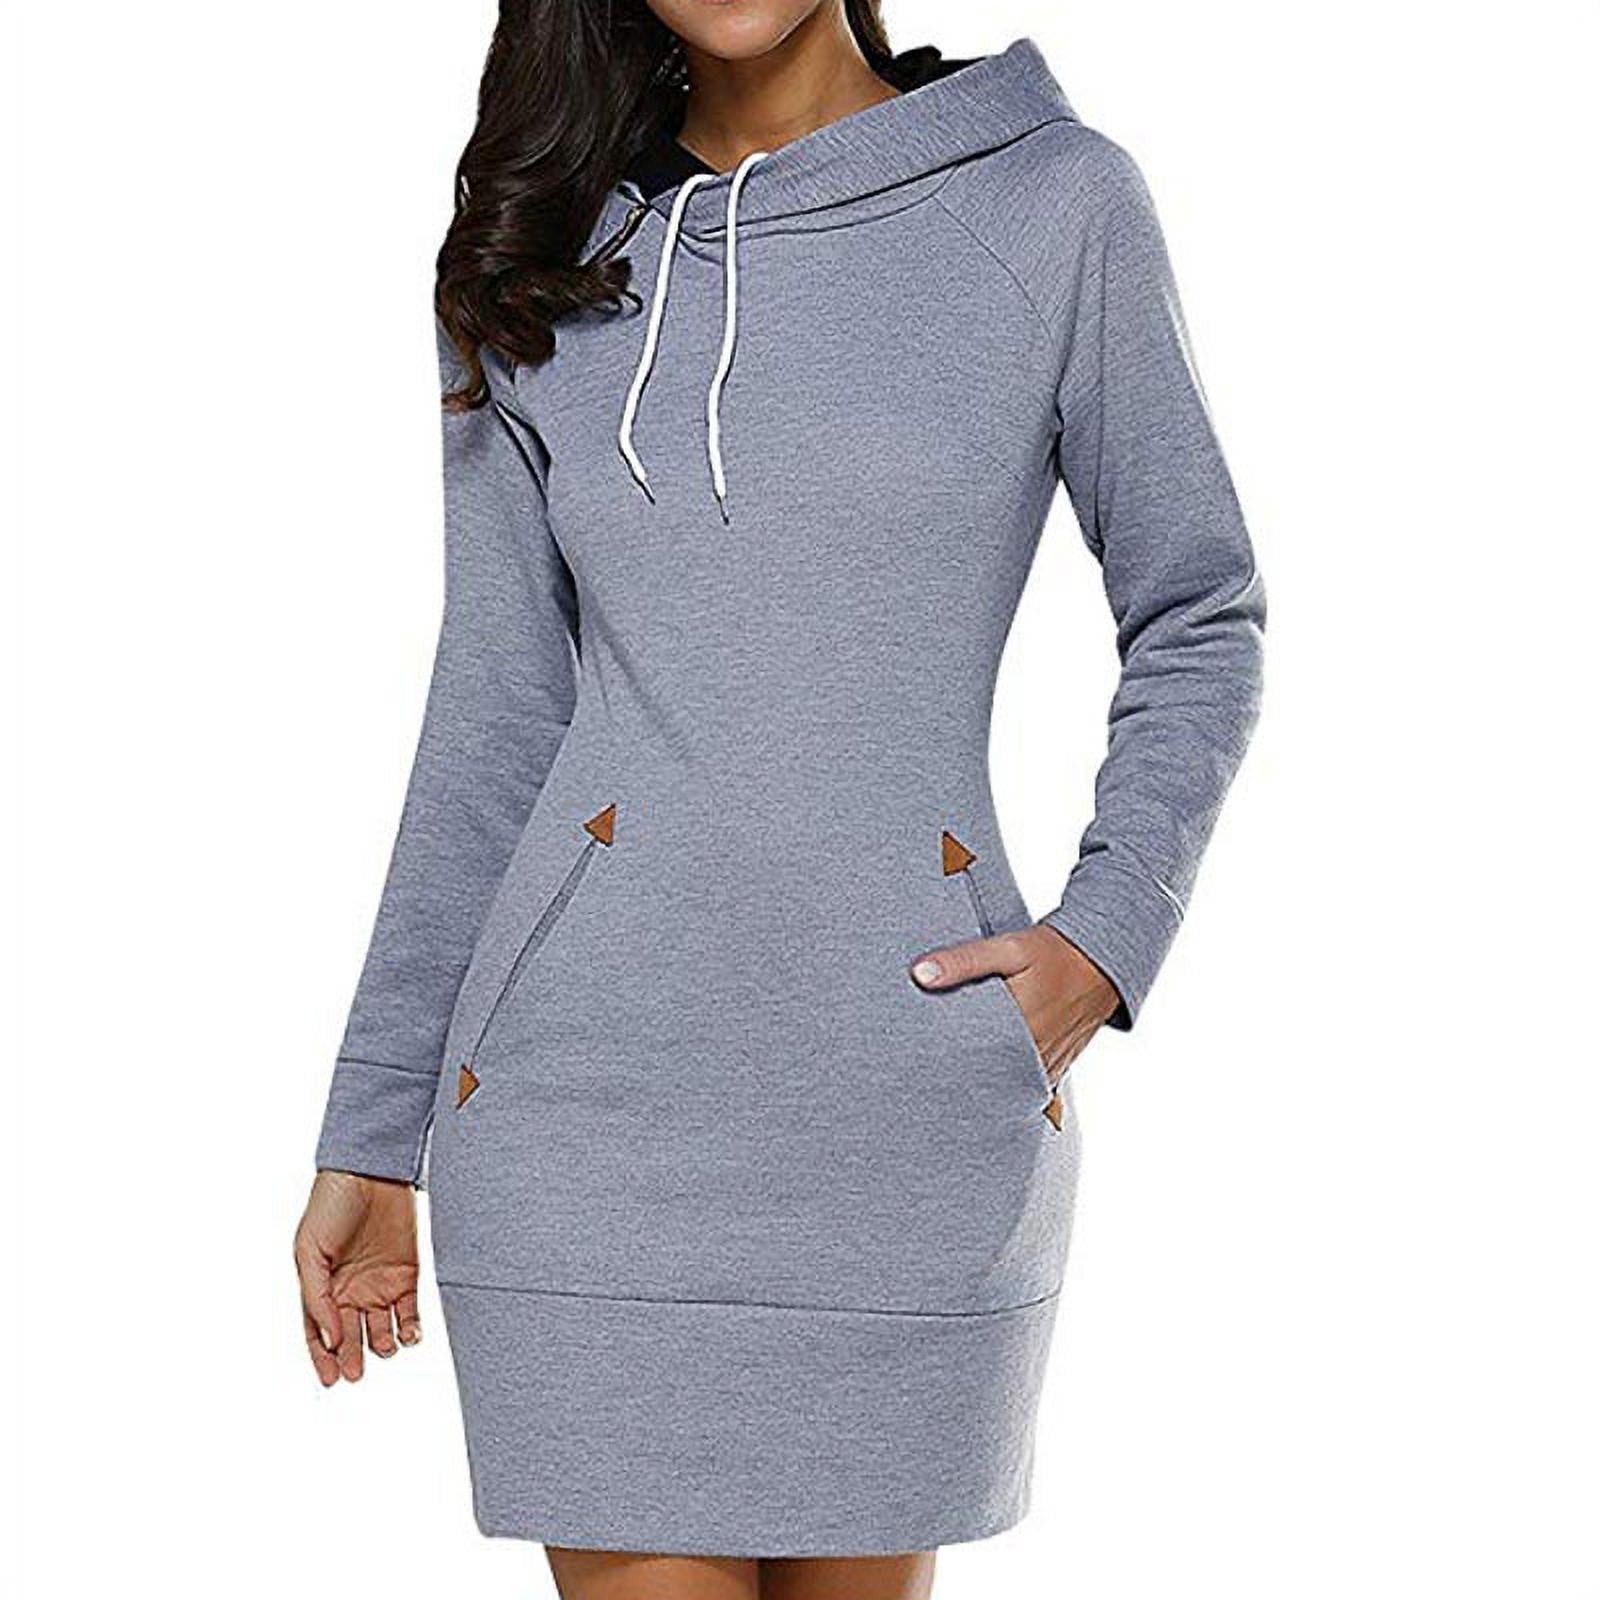 Womens Long Sleeve Hooded Skull Butterflies Loose Casual Pullover Hoodie Dress Tunic Sweatshirt Dress with Pockets 